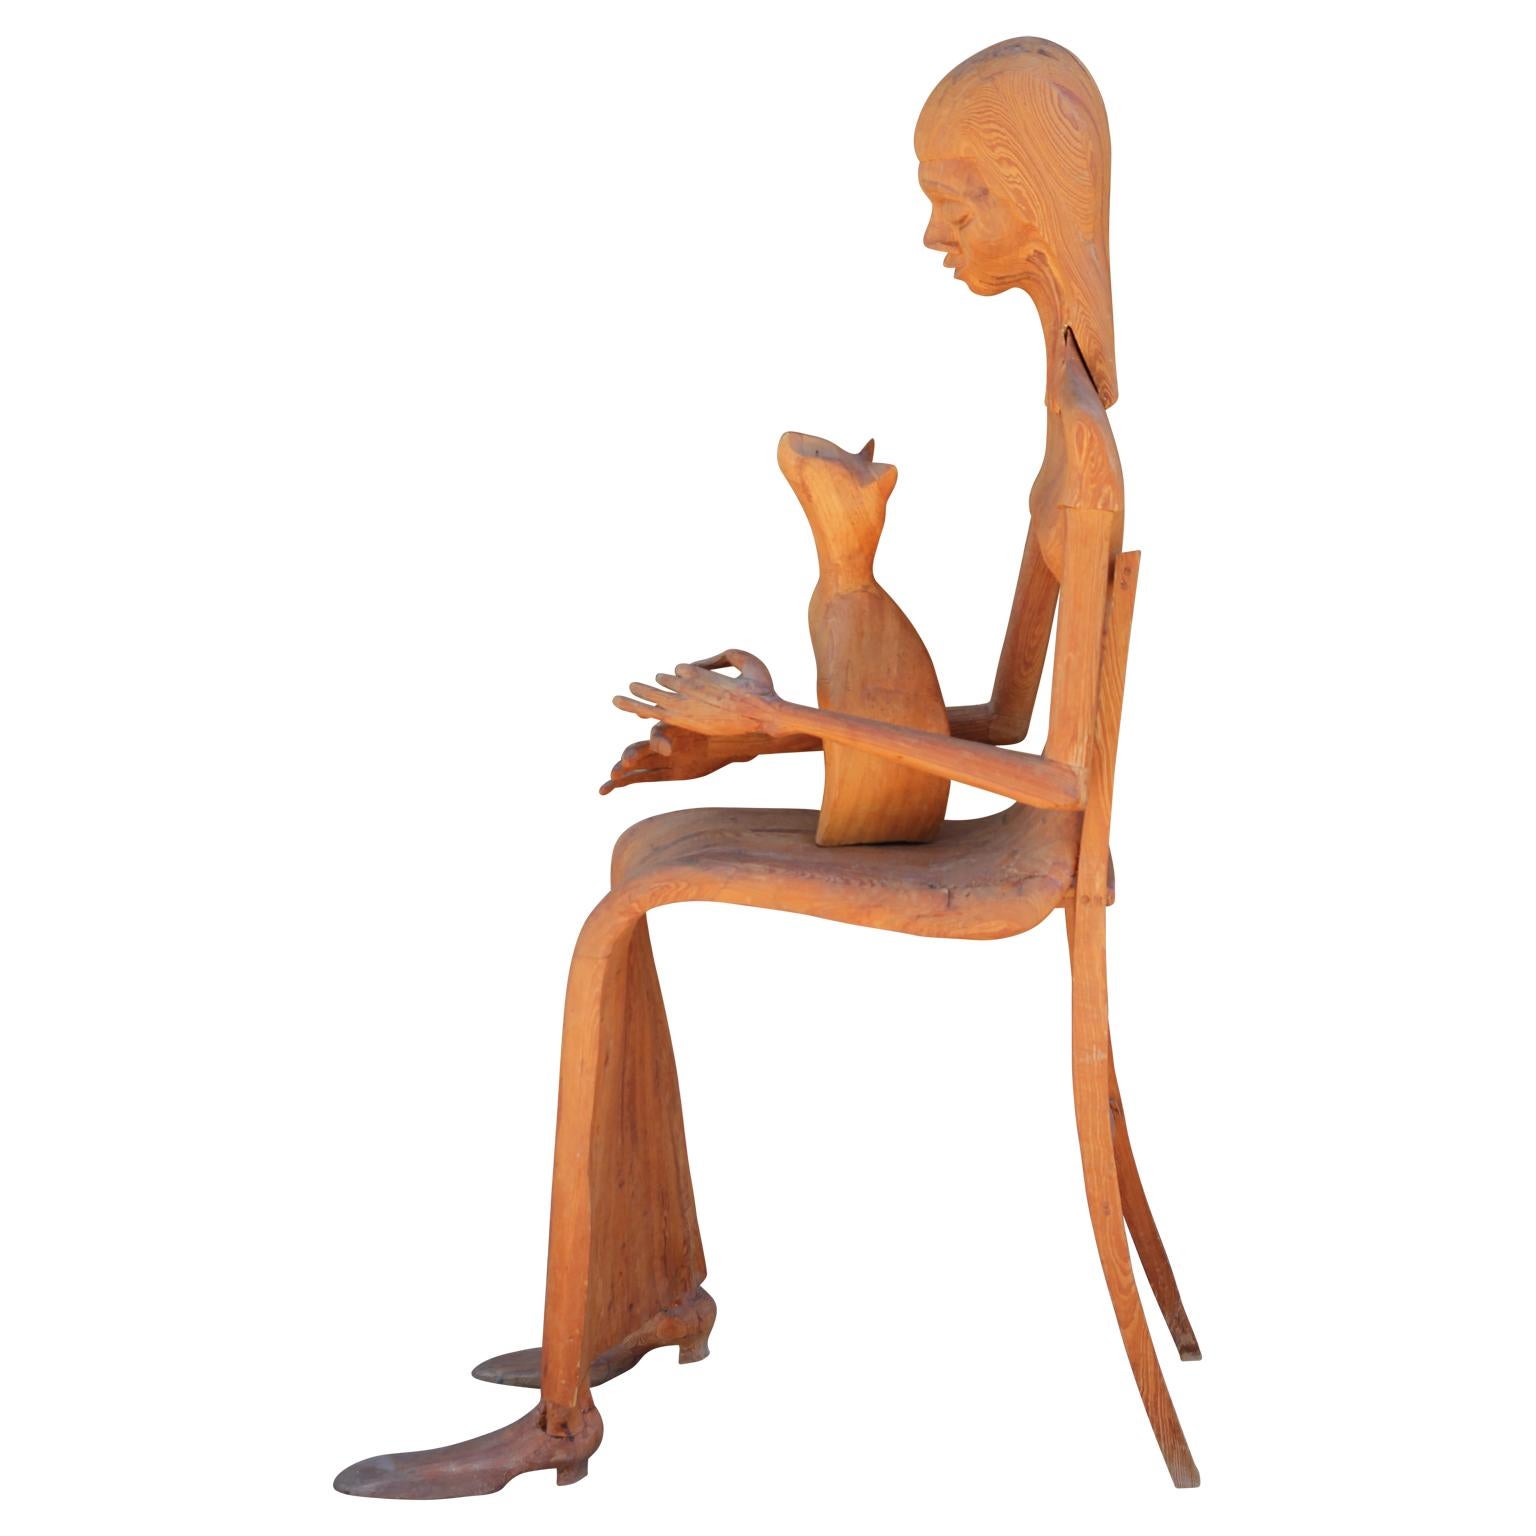 Modern Hand Carved Wooden Folk Sculpture of a Seated Woman with a Pet Cat  - Brown Figurative Sculpture by Marion Perkins